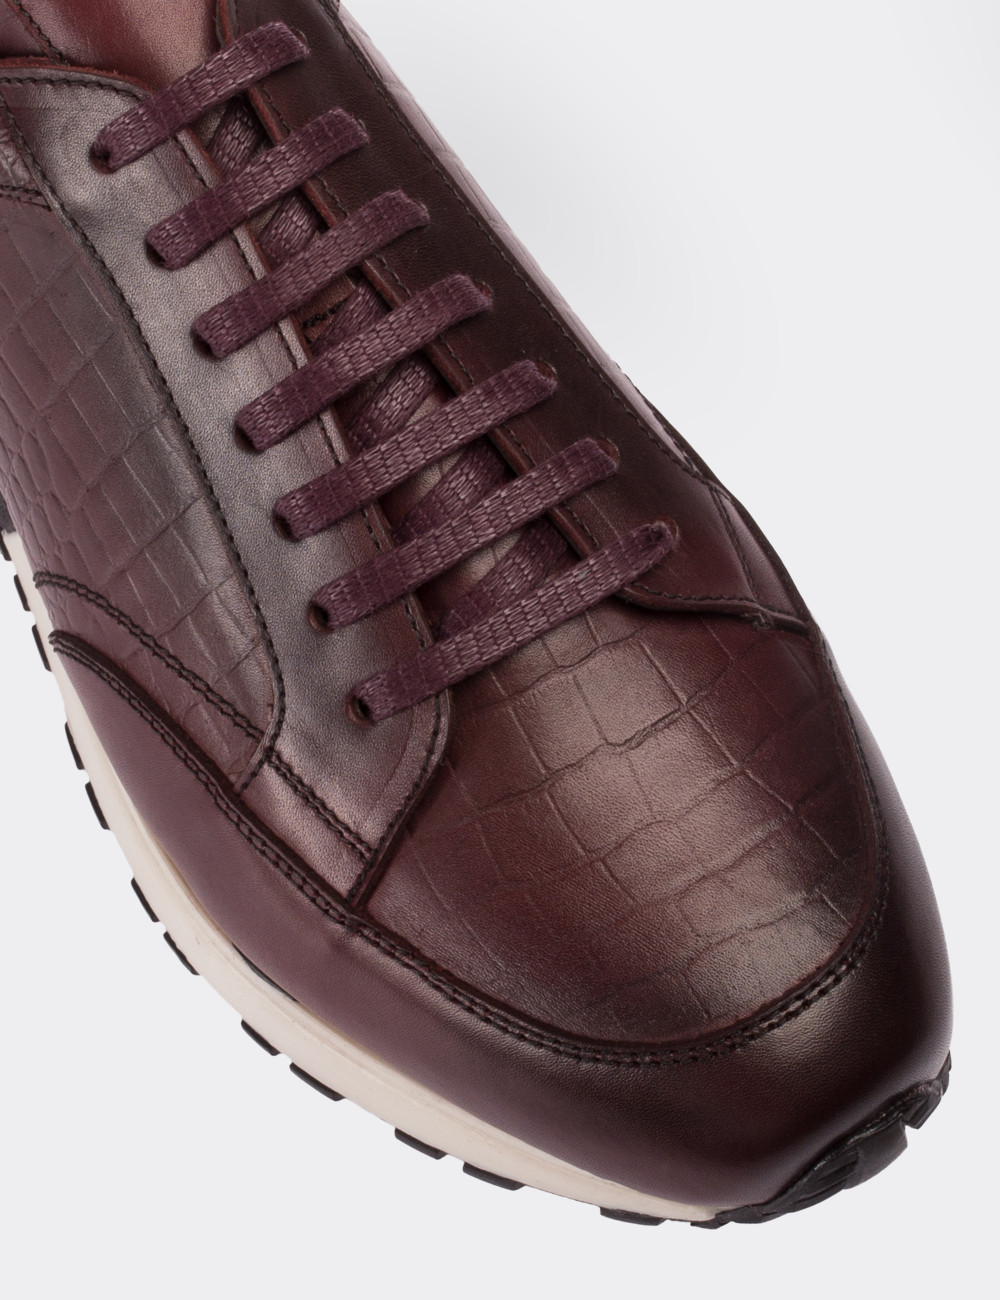 Burgundy  Leather Lace-up Shoes - 01632MBRDT02